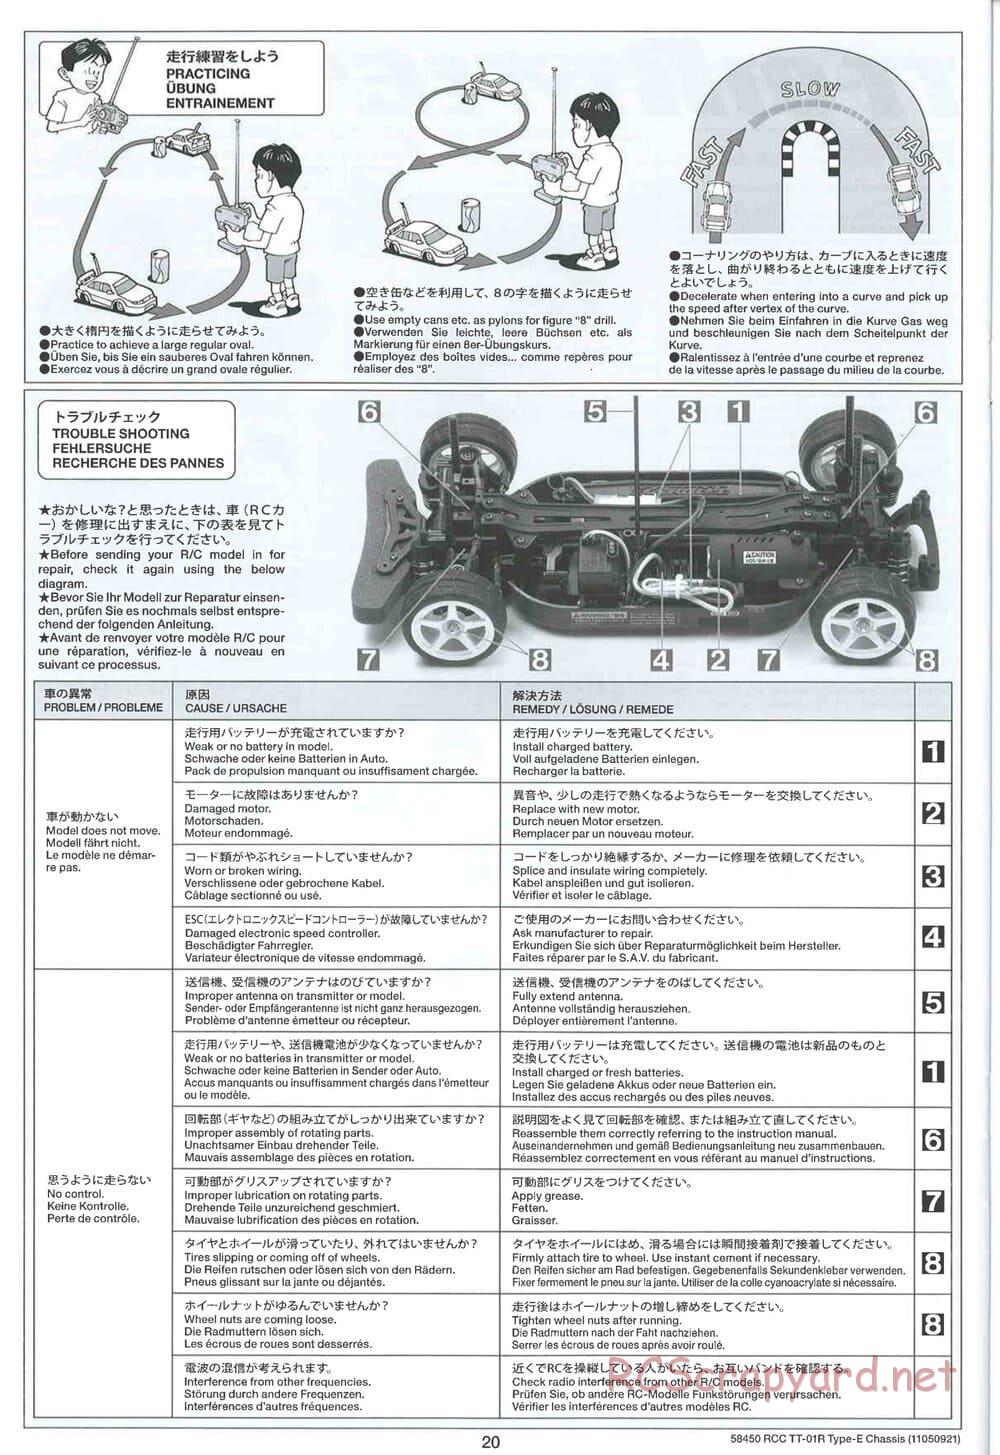 Tamiya - TT-01R Type-E Chassis - Manual - Page 20